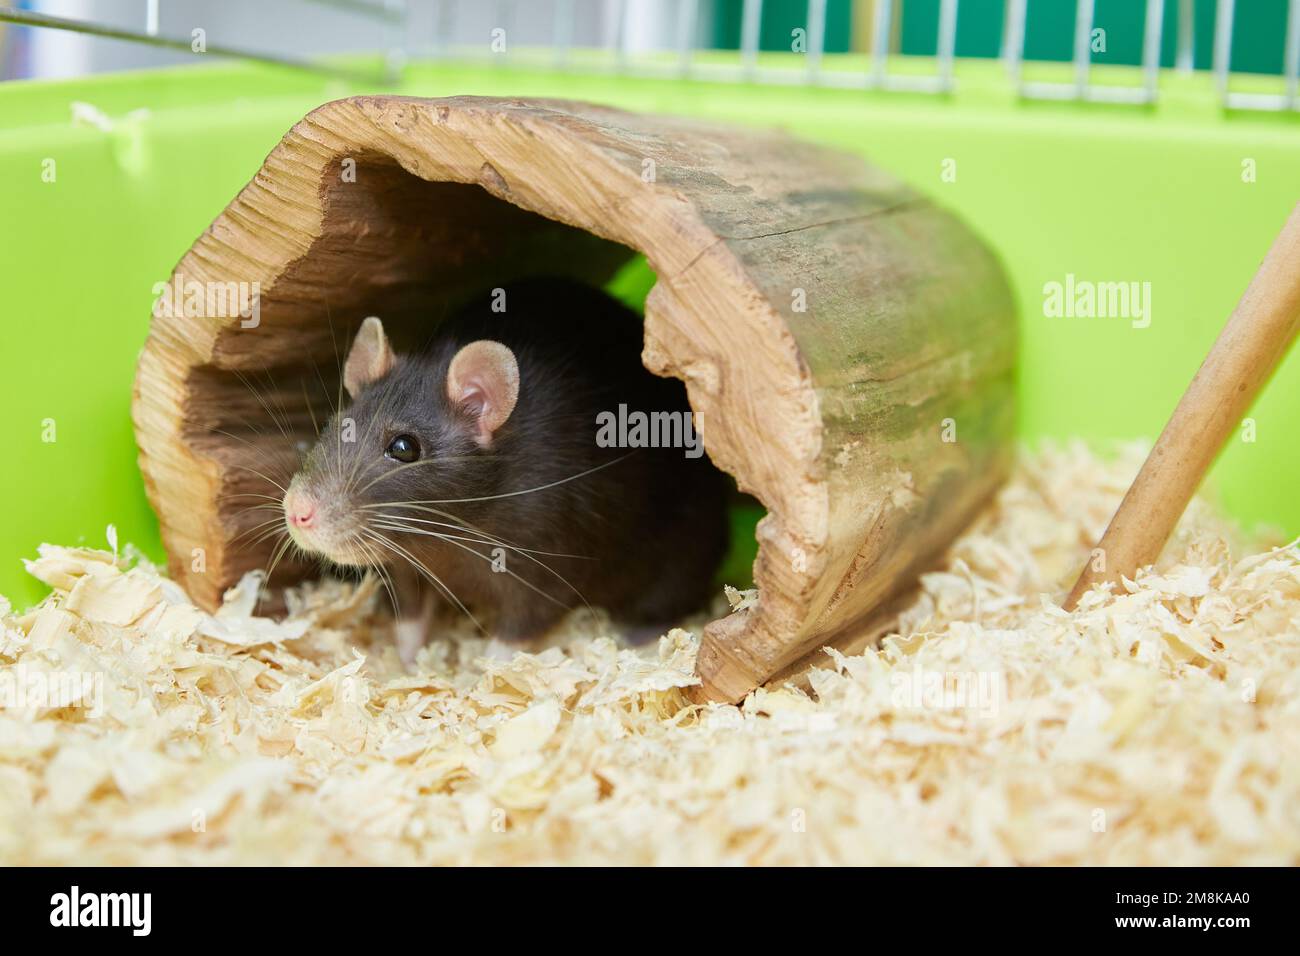 Domestic rat in a wooden house close-up. Stock Photo